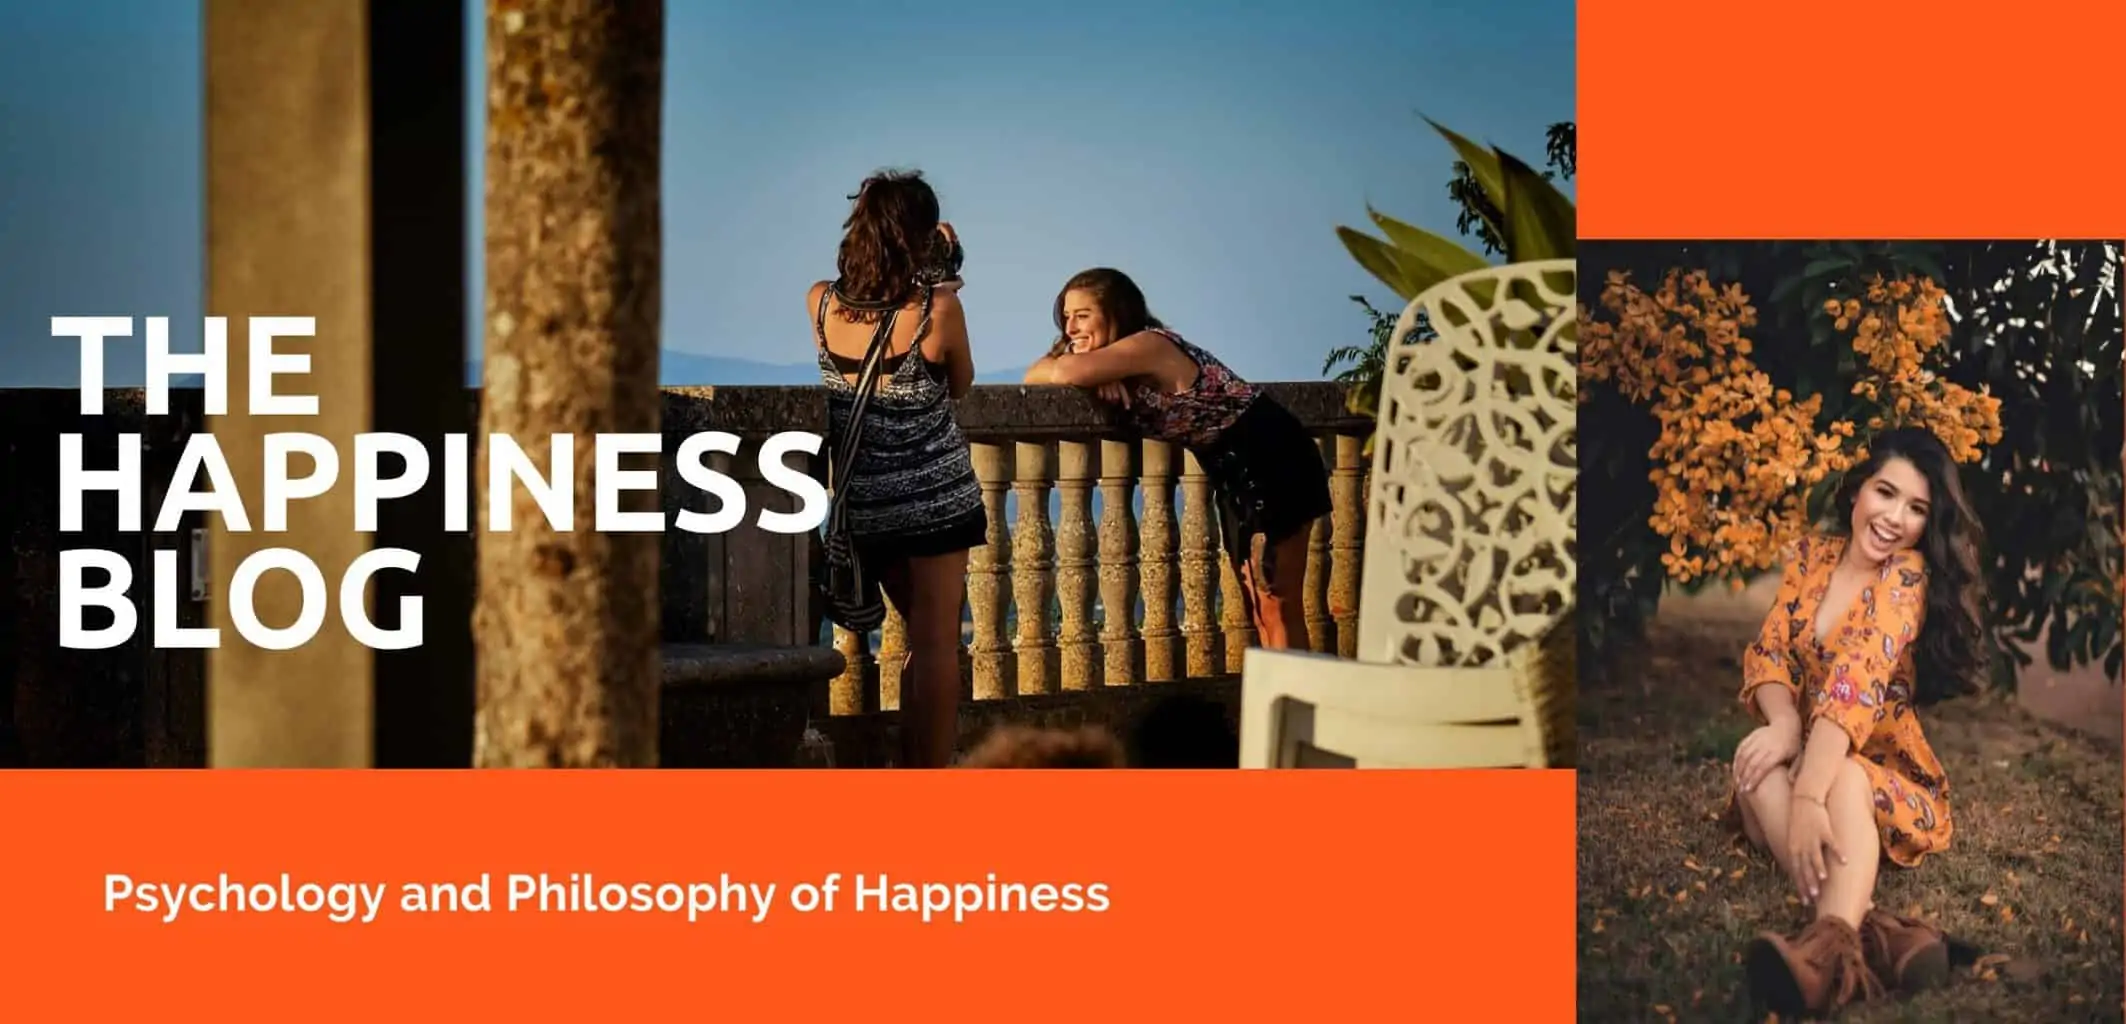 The Happiness Blog - Psychology & Philosophy of Happiness